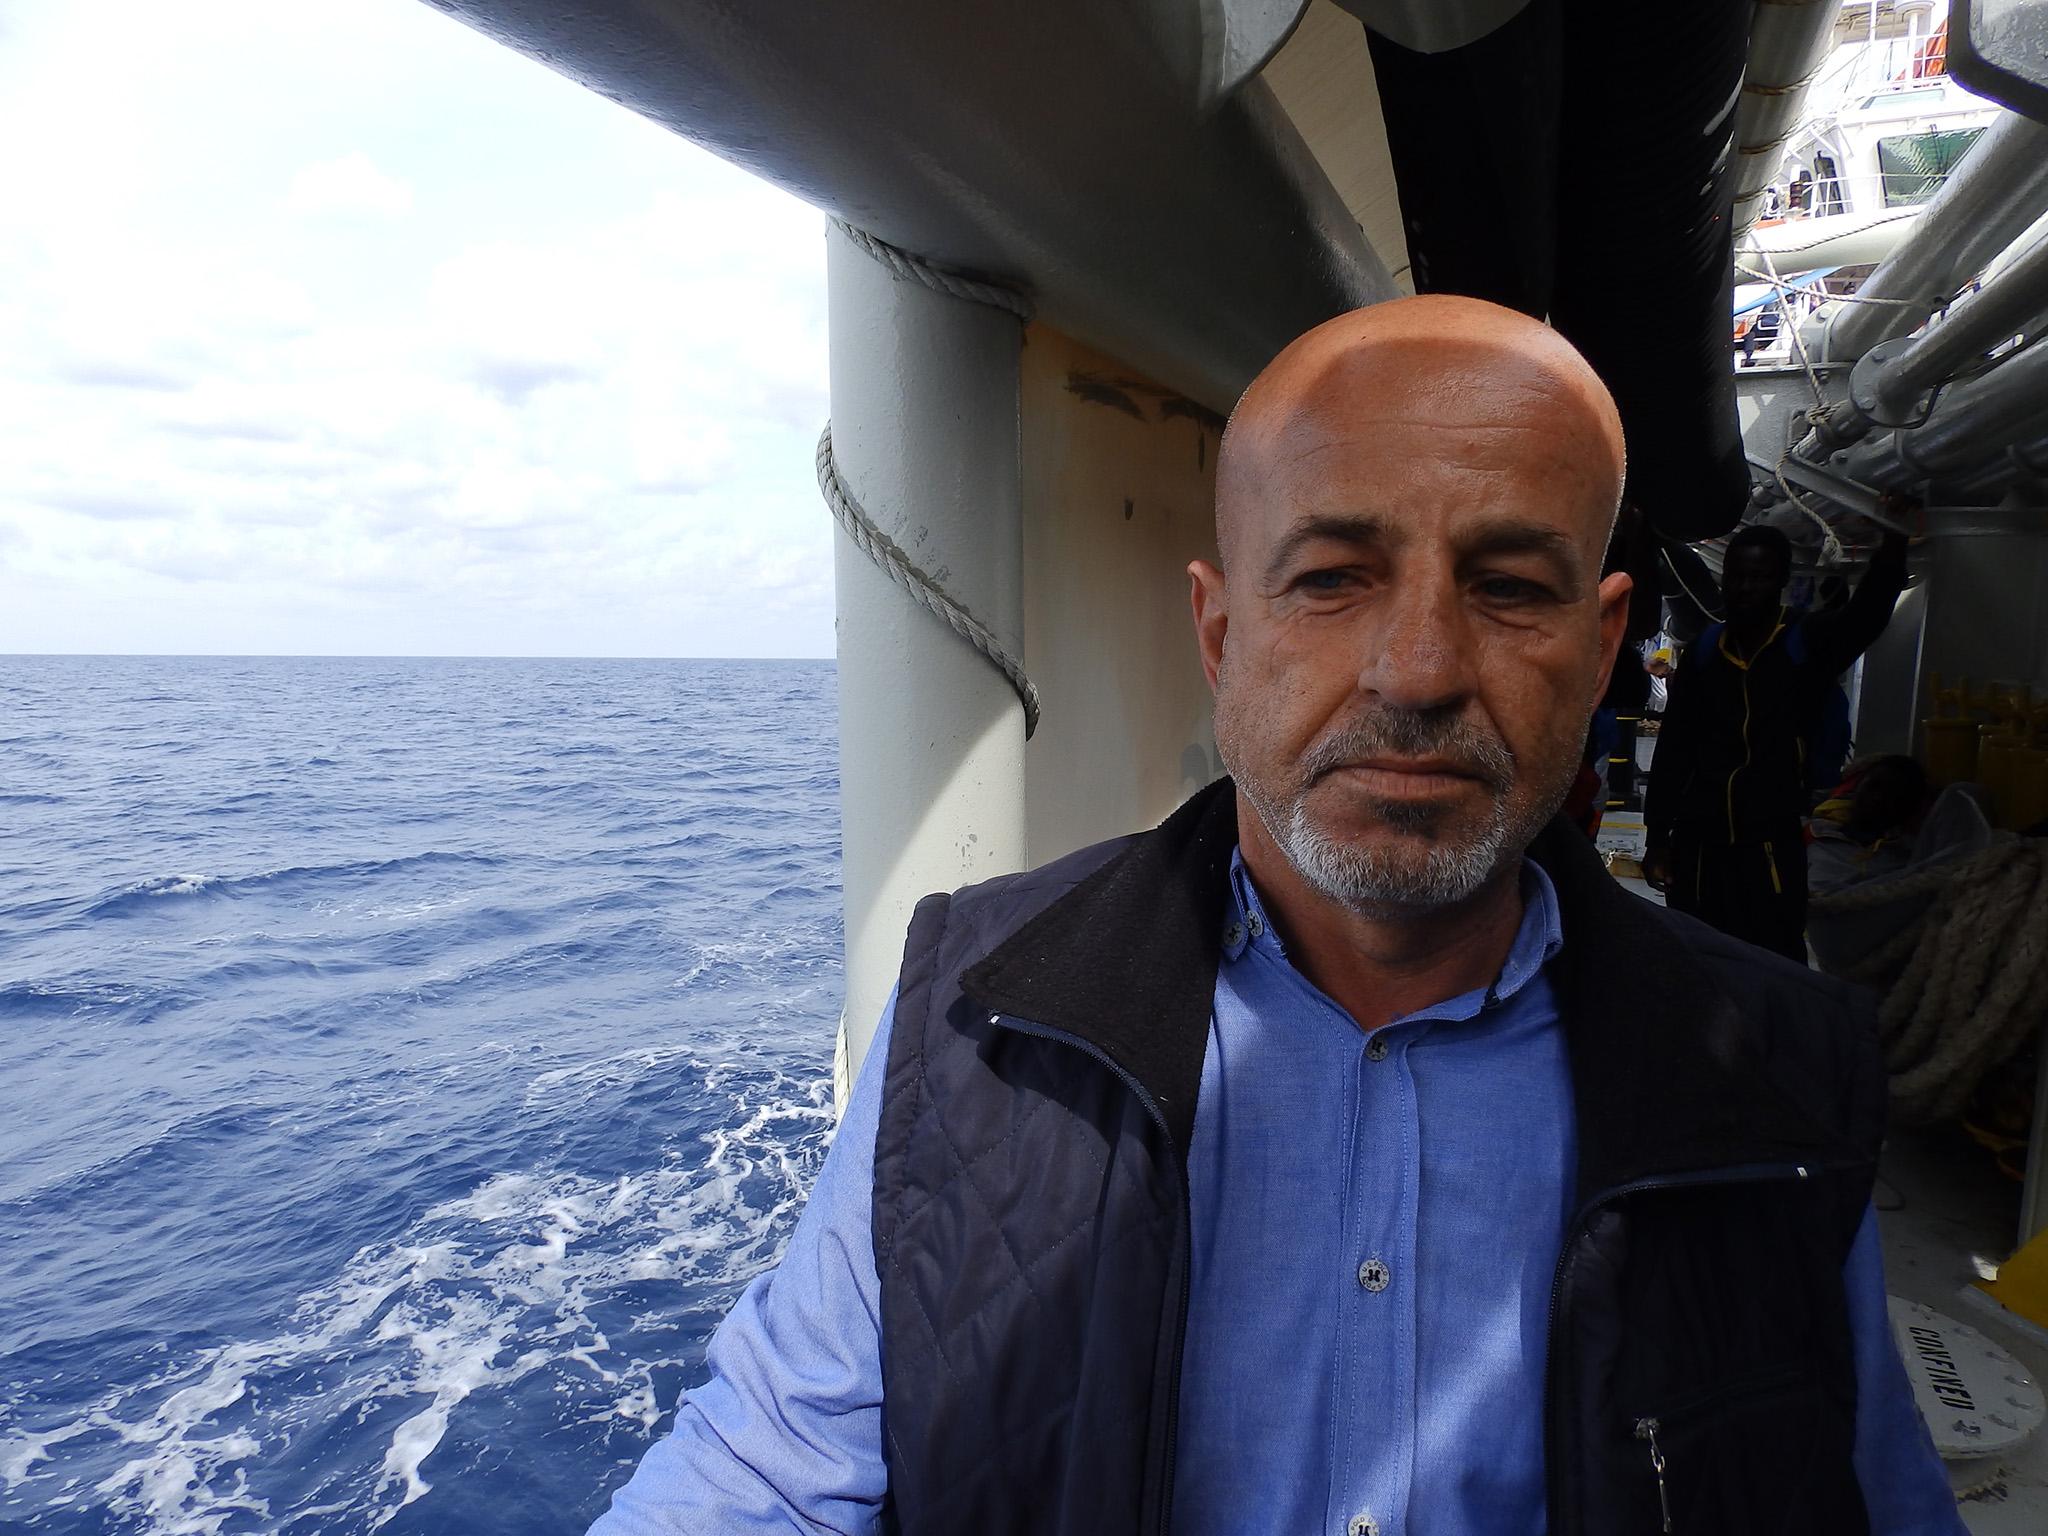 Ali Ibrahim Salman, a 51-year-old Syrian man fled Syria after losing his child in a shelling